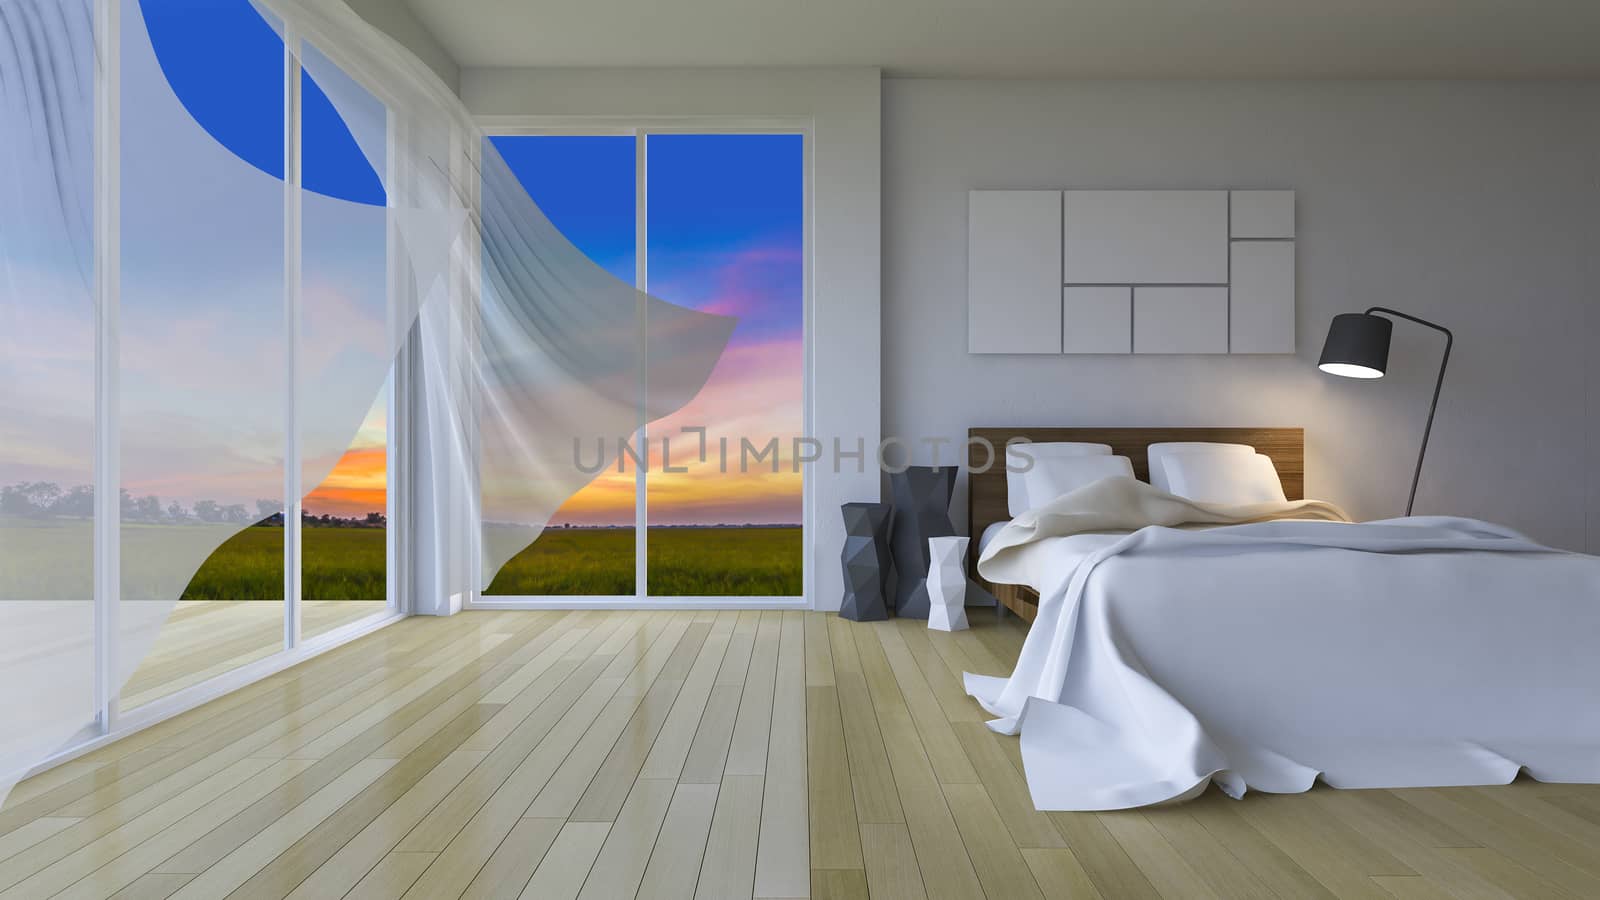 3ds rendering of  modern bedroom in sunset time by Kankliang